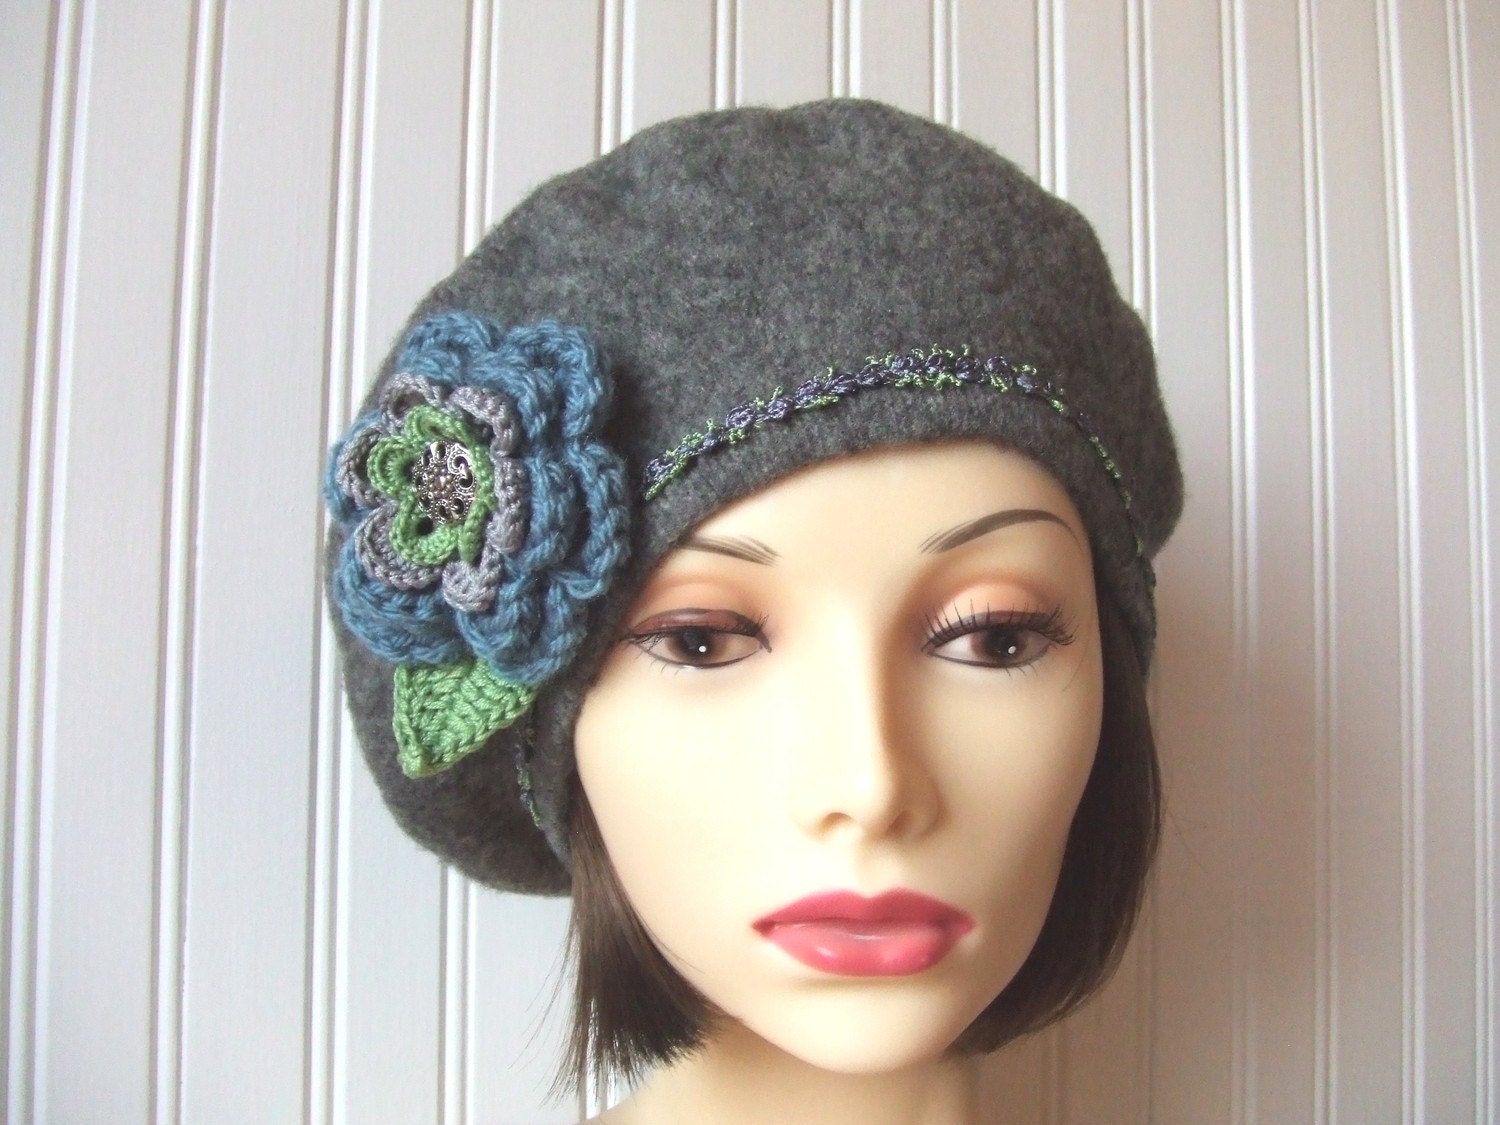 Heathered Charcoal Grey Wool Beret with Flower Brooch....Winter Fashion